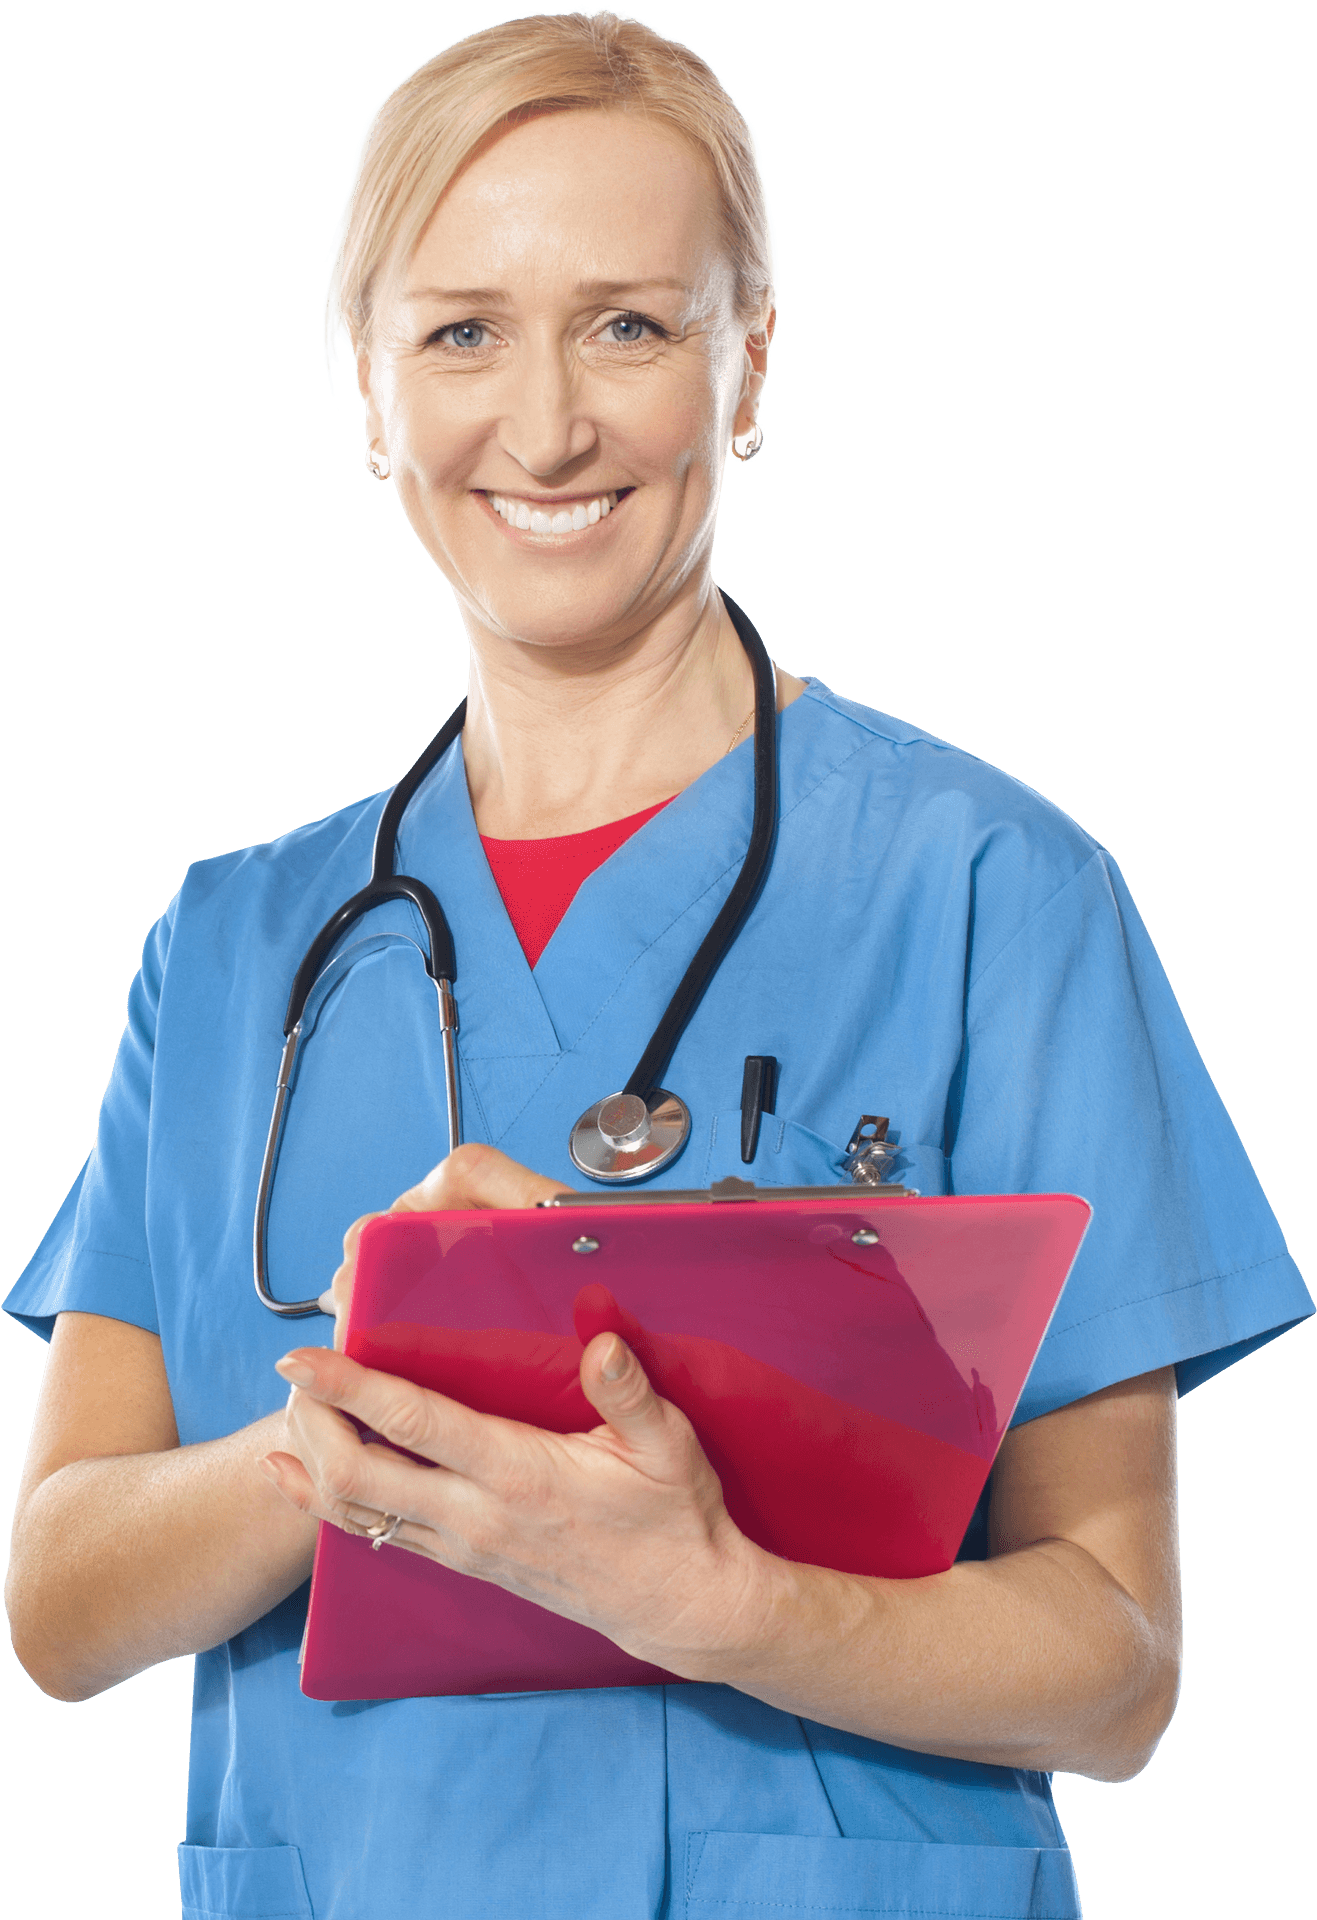 Confident Female Physician With Clipboard PNG